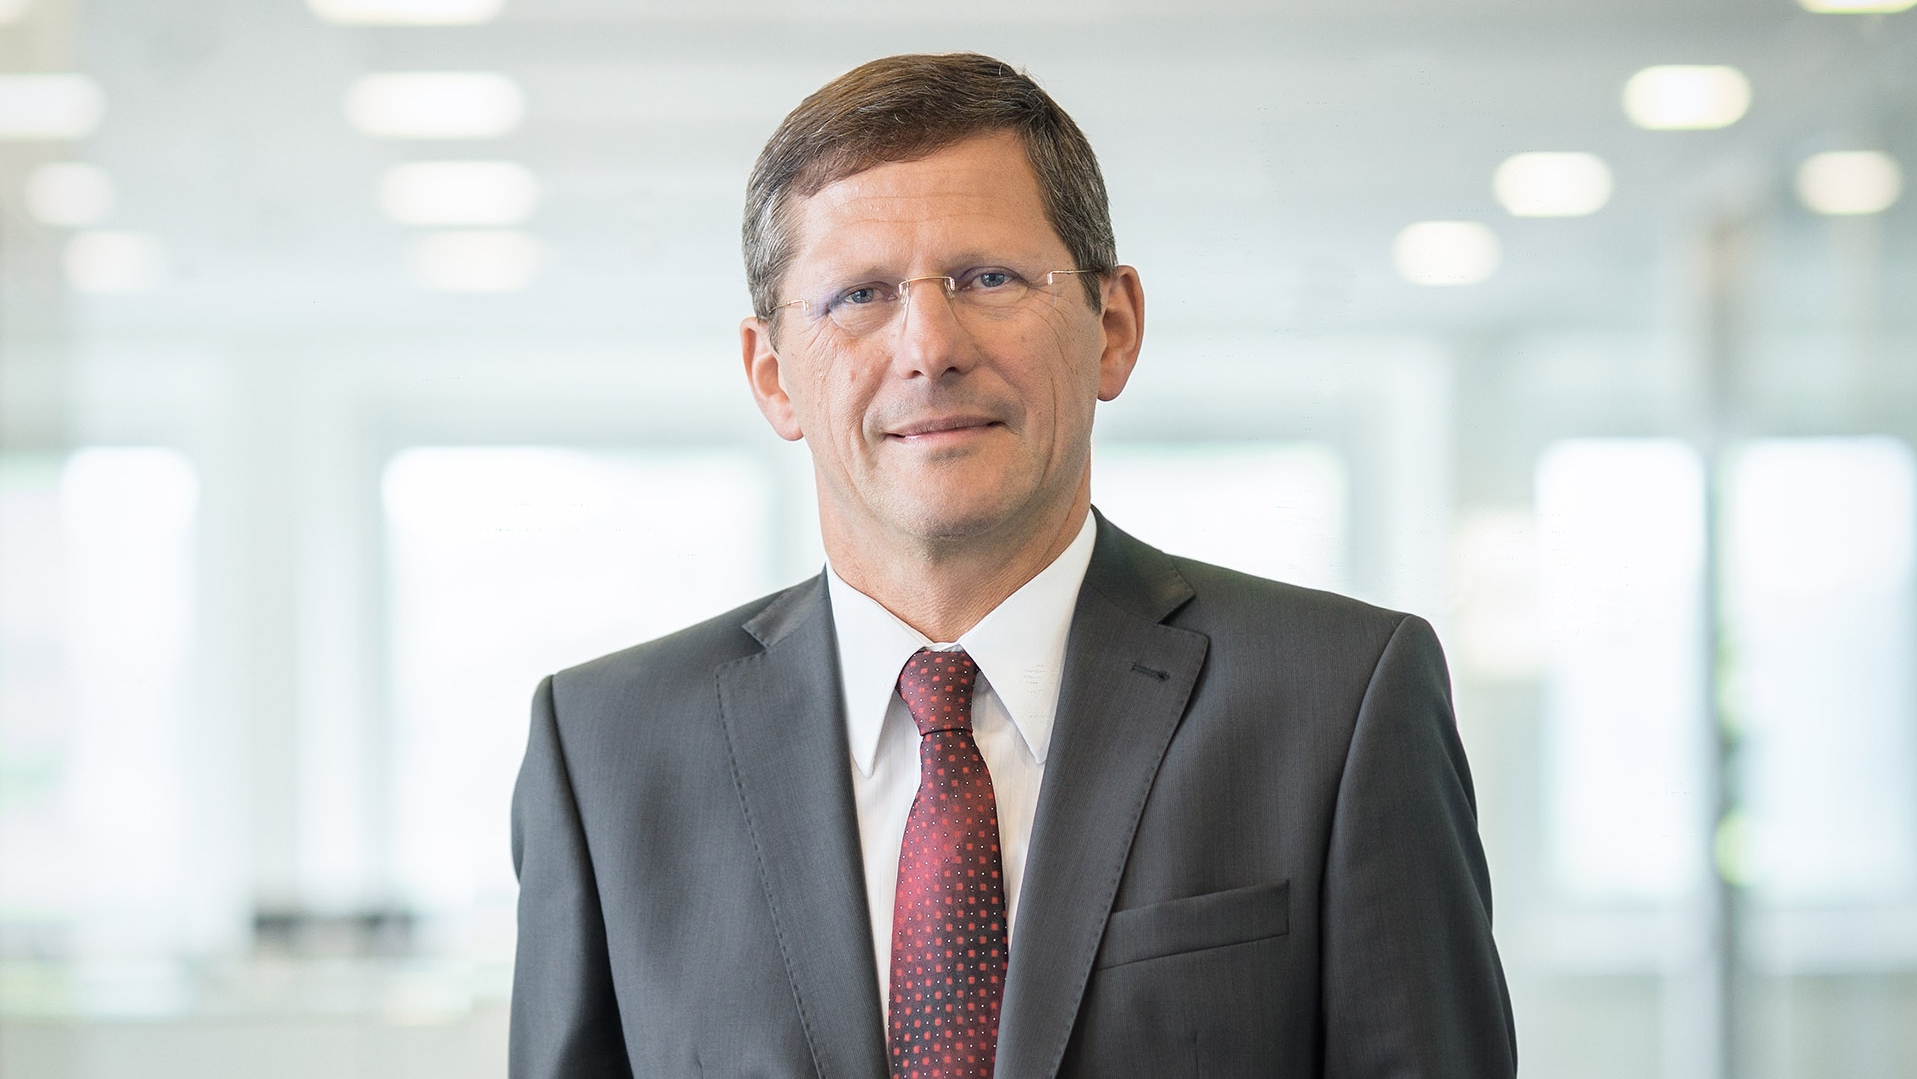 Prof. Dr. sc. nat. Michael Kaschke, President and CEO of the ZEISS Group